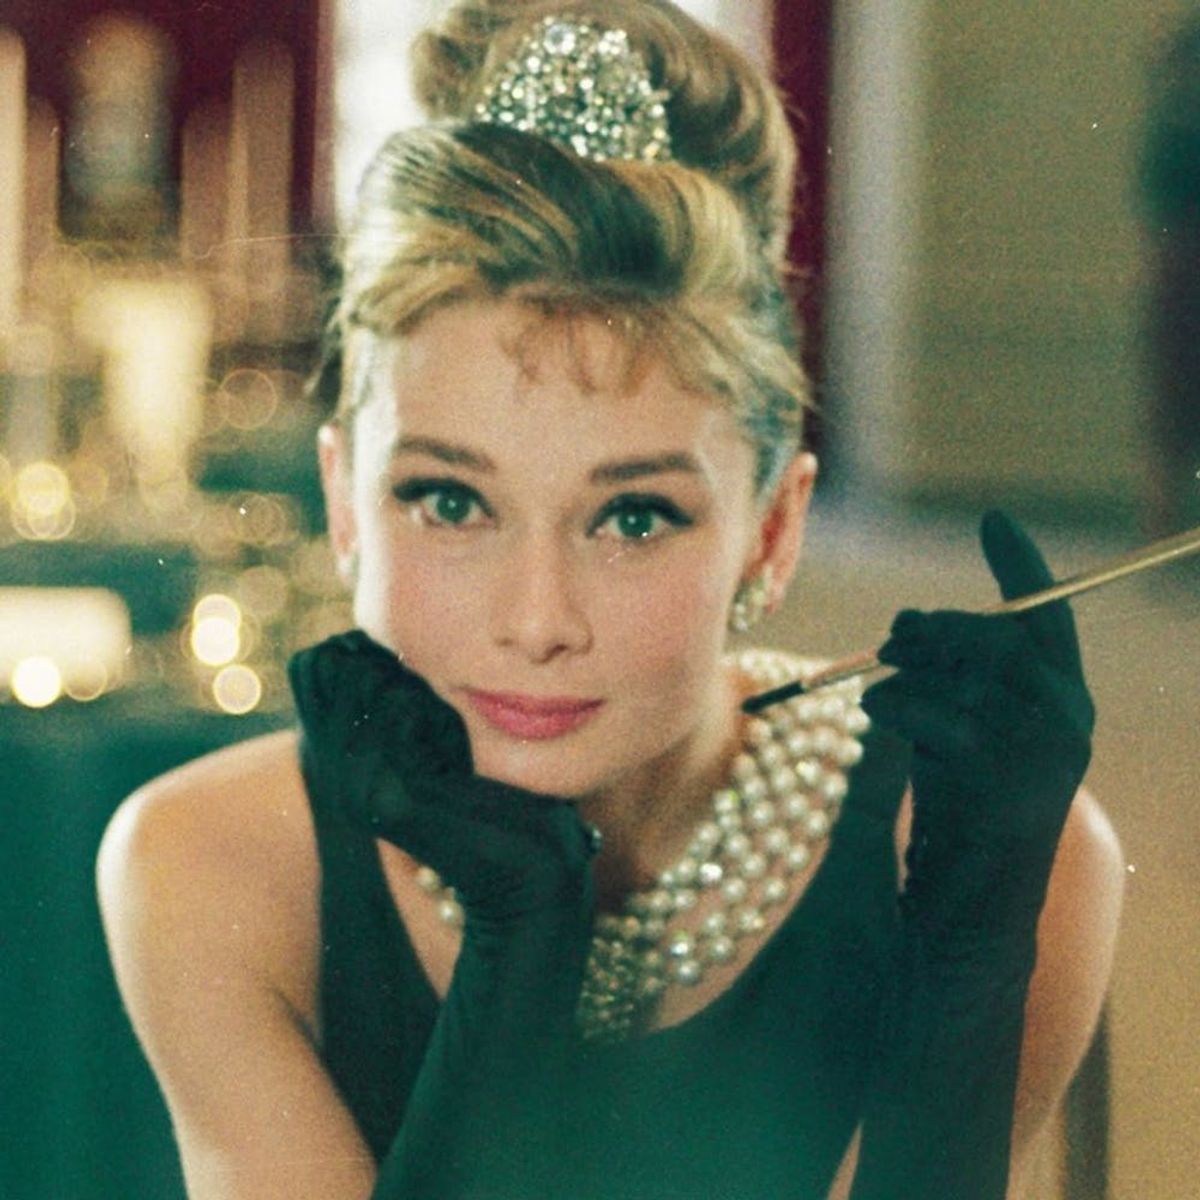 You Need to See This Breakfast at Tiffany’s-Inspired Wedding Dress Collection